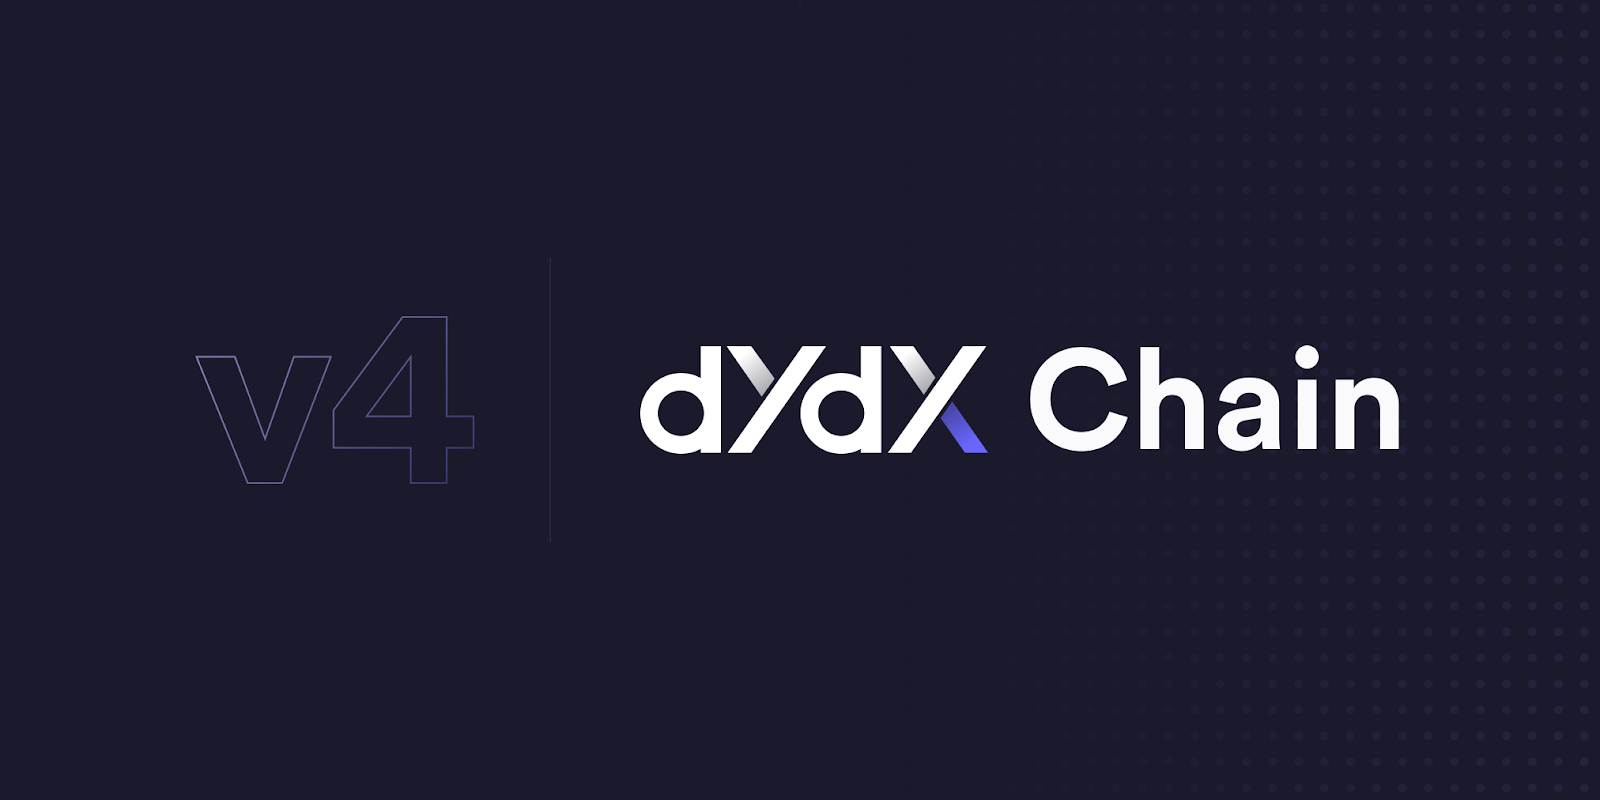 The fall 2023 announcement of dYdX v4 and dYdX Chain and the project’s recent integrations with Circle and Coinbase bodes well for the regulatory future of dYdX moving forward. These partnerships are massive because Circle and Coinbase are some of the largest crypto companies in the world, meaning in all likelihood, that dYdX is safe from the relentless anti-crypto enforcement initiative that the Securities and Exchange Commission (SEX) has become so well known for in recent years. (Image Credit: Announcing dYdX Chain via the dYdX blog)